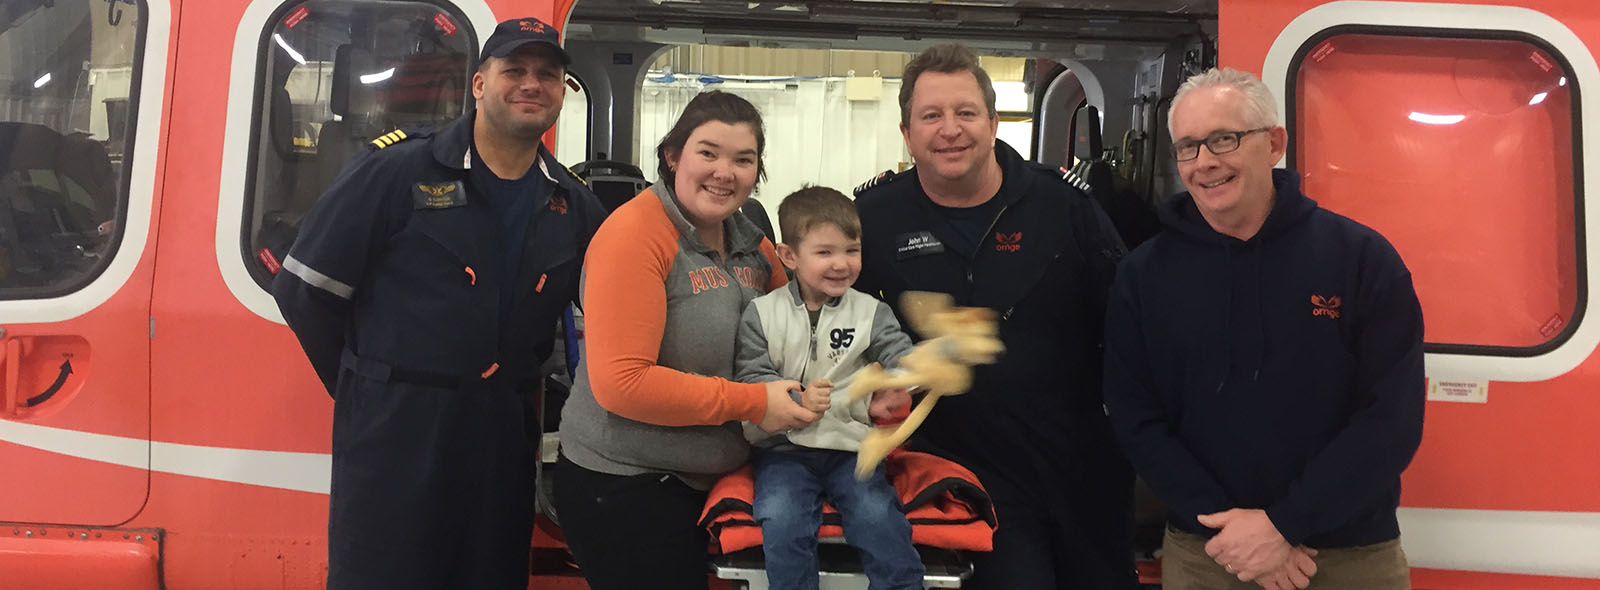 Christine Normore and son Joseph reconnect with Ornge crew